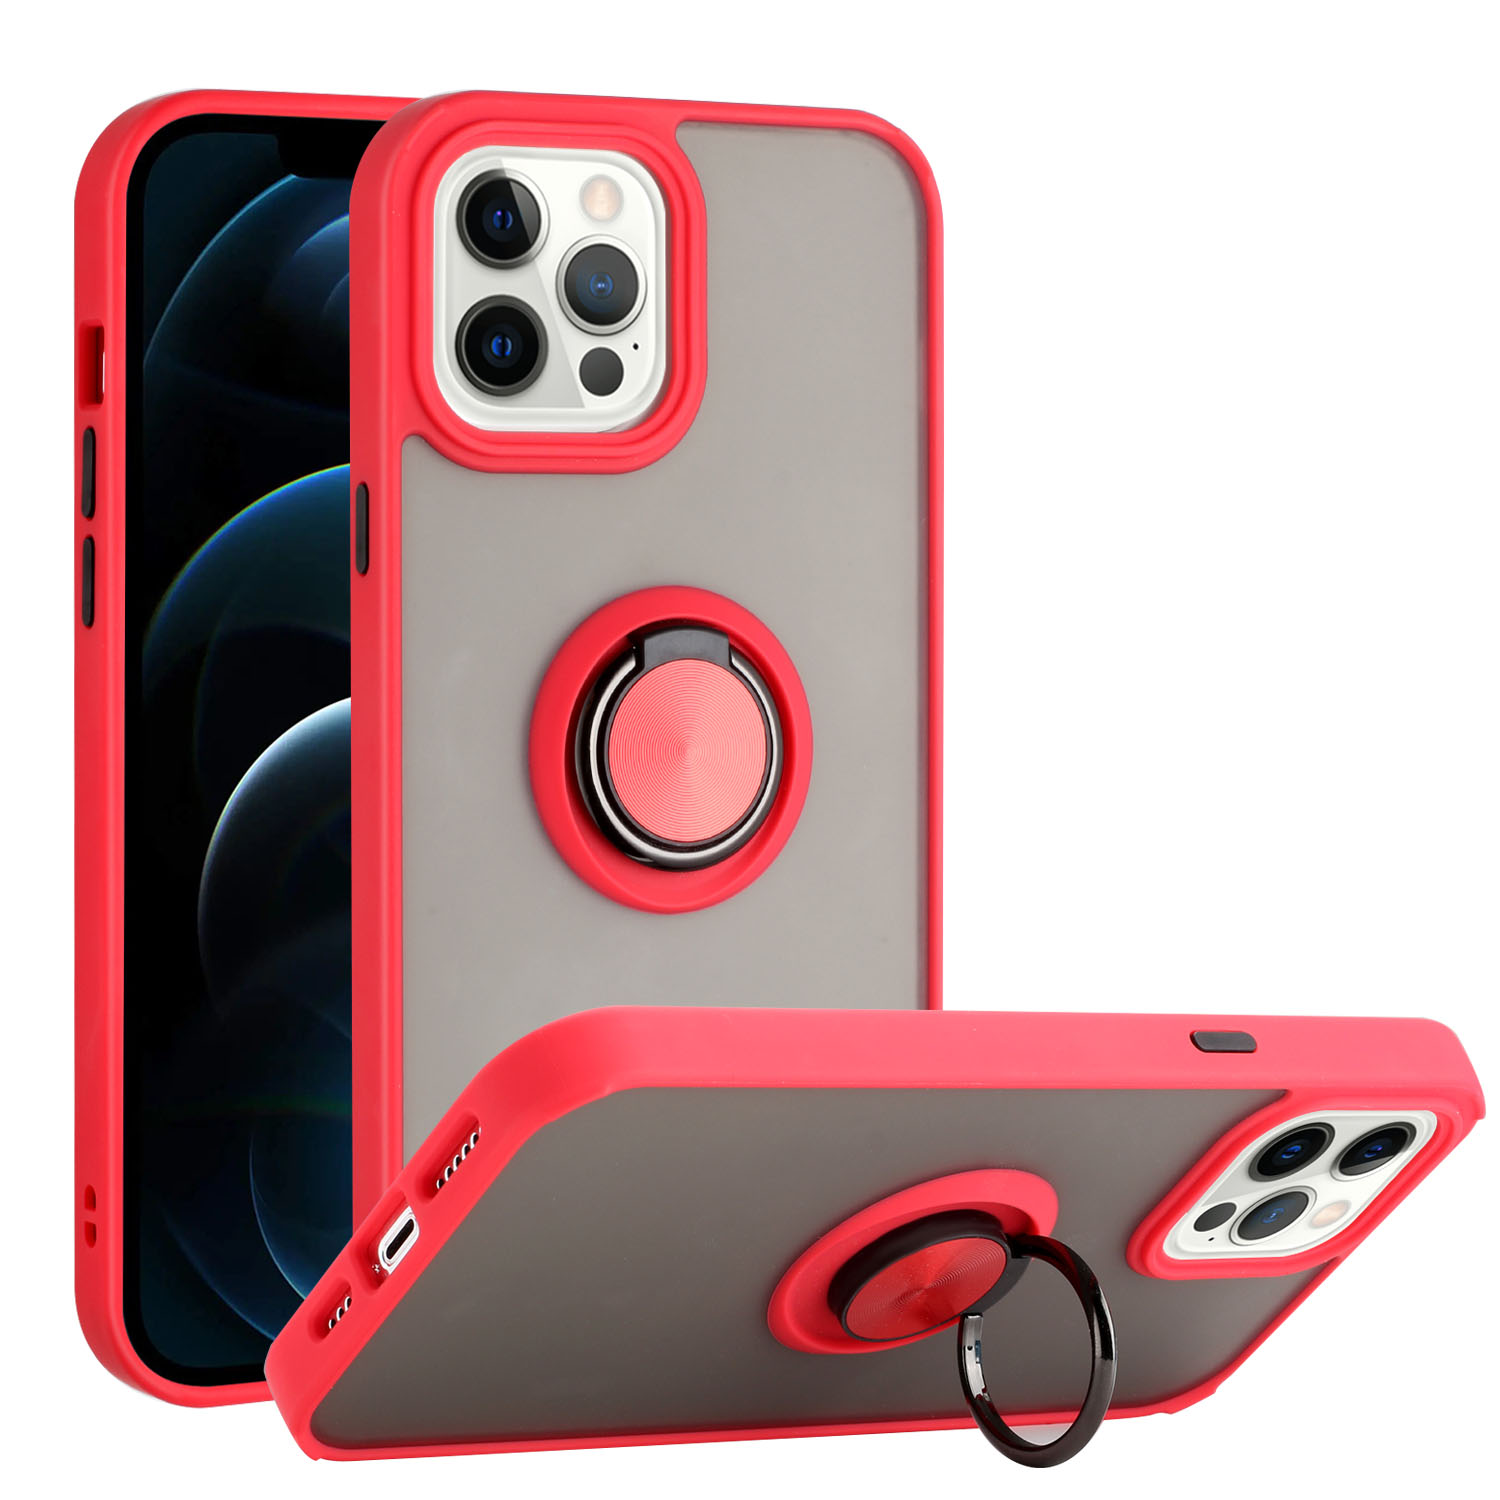 Tuff Slim Armor Hybrid RING Stand Case for Apple iPhone 13 [6.1] (Red)